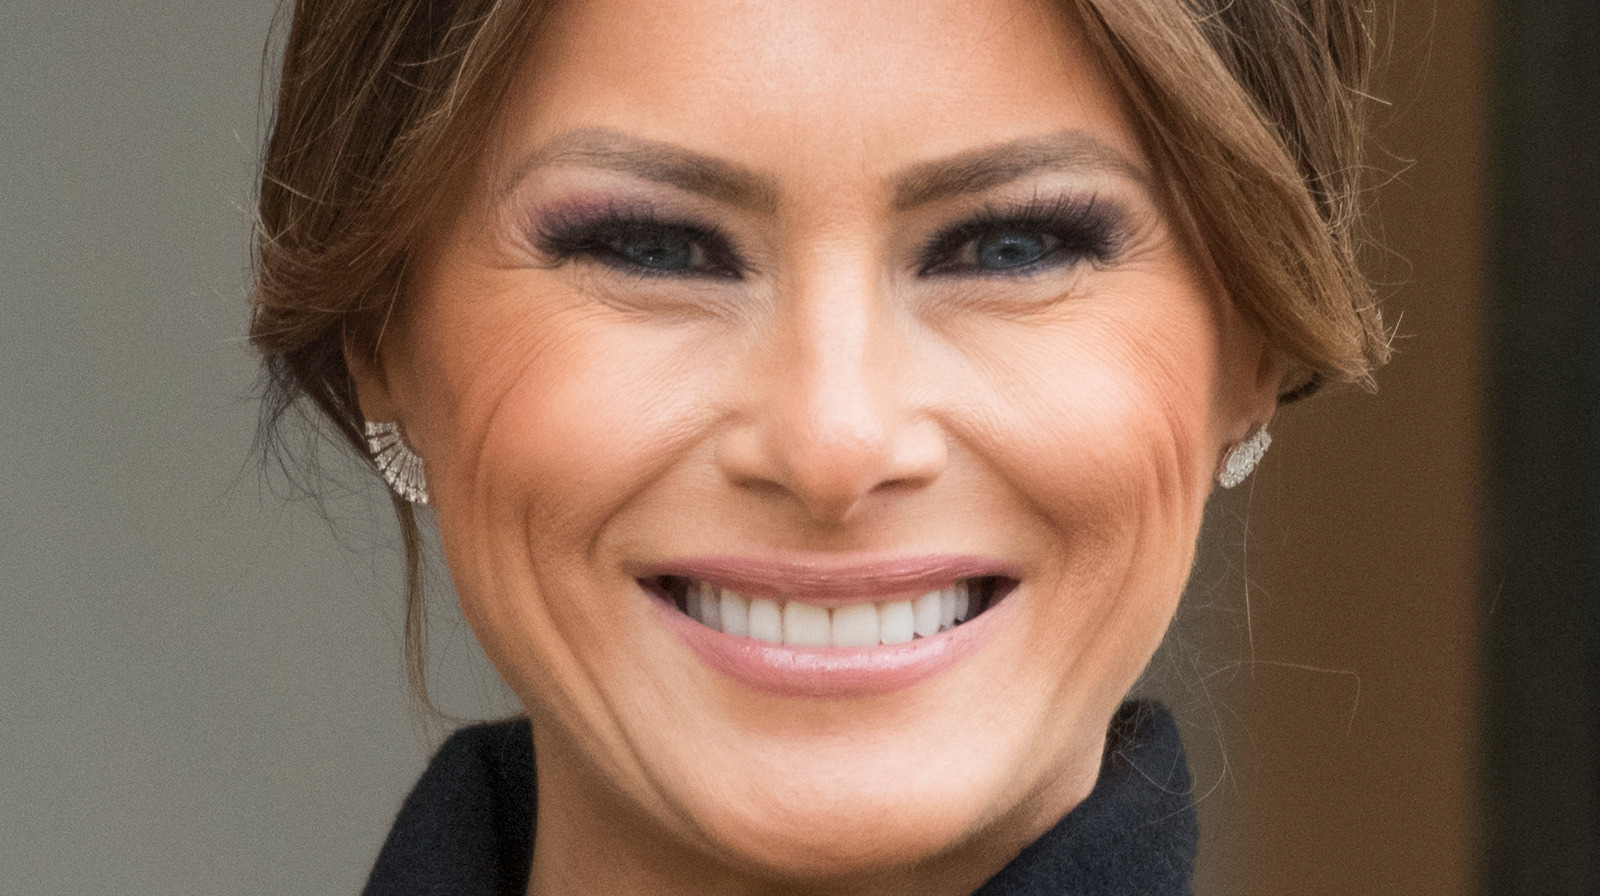 Twitter Takes A Very Uncensored View Of Melania Trump Following The Fbi